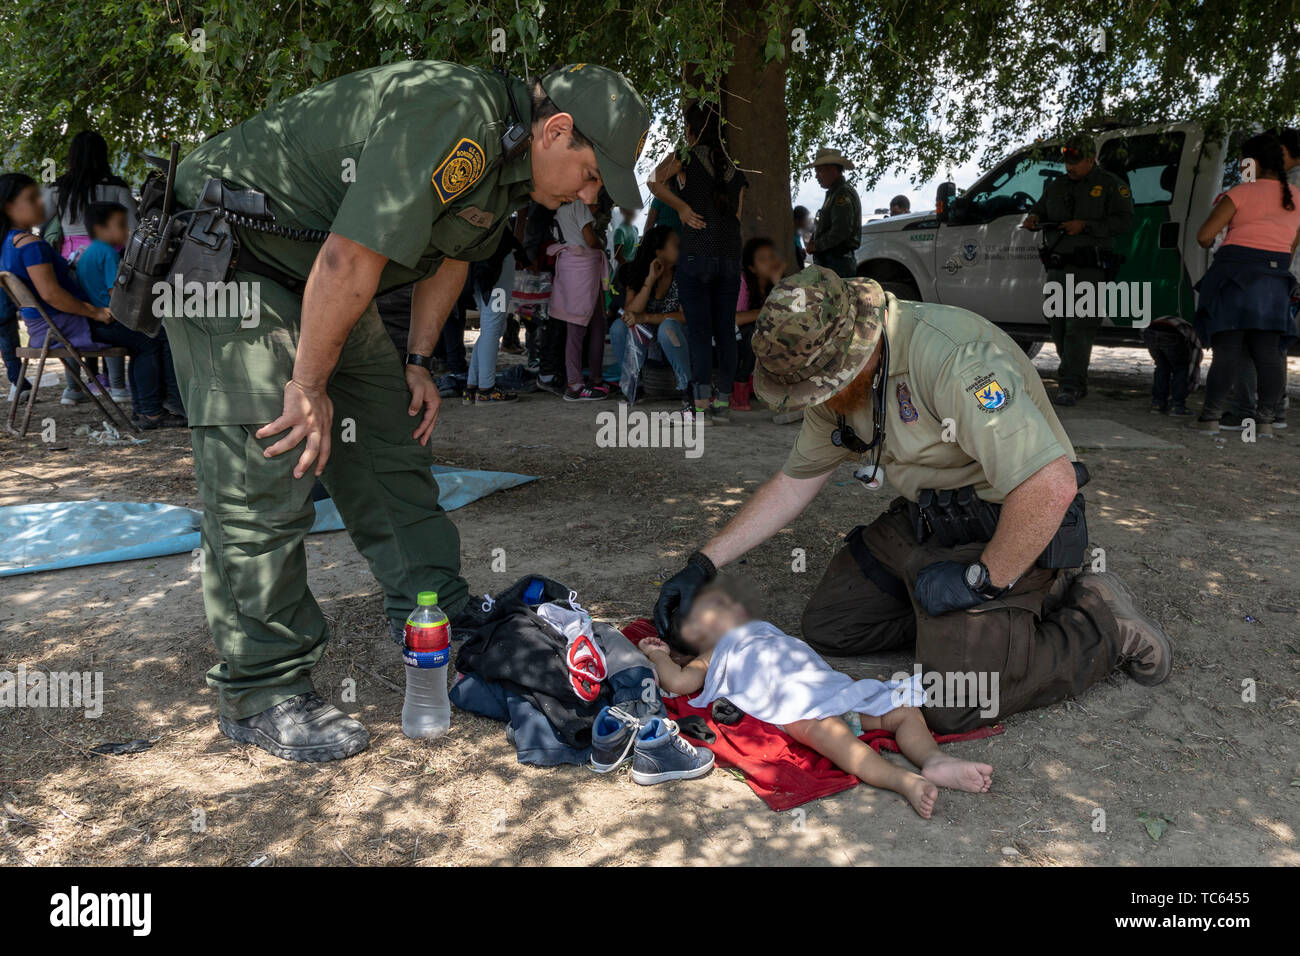 U.S. Fish and Wildlife Service Officers assist with medical aid for an infant after a group of illegal migrants from central America that crossed the Rio Grande River May 31, 2019 near McAllen, Texas. The faces are obscured by the Border Patrol to protect their identity. Stock Photo